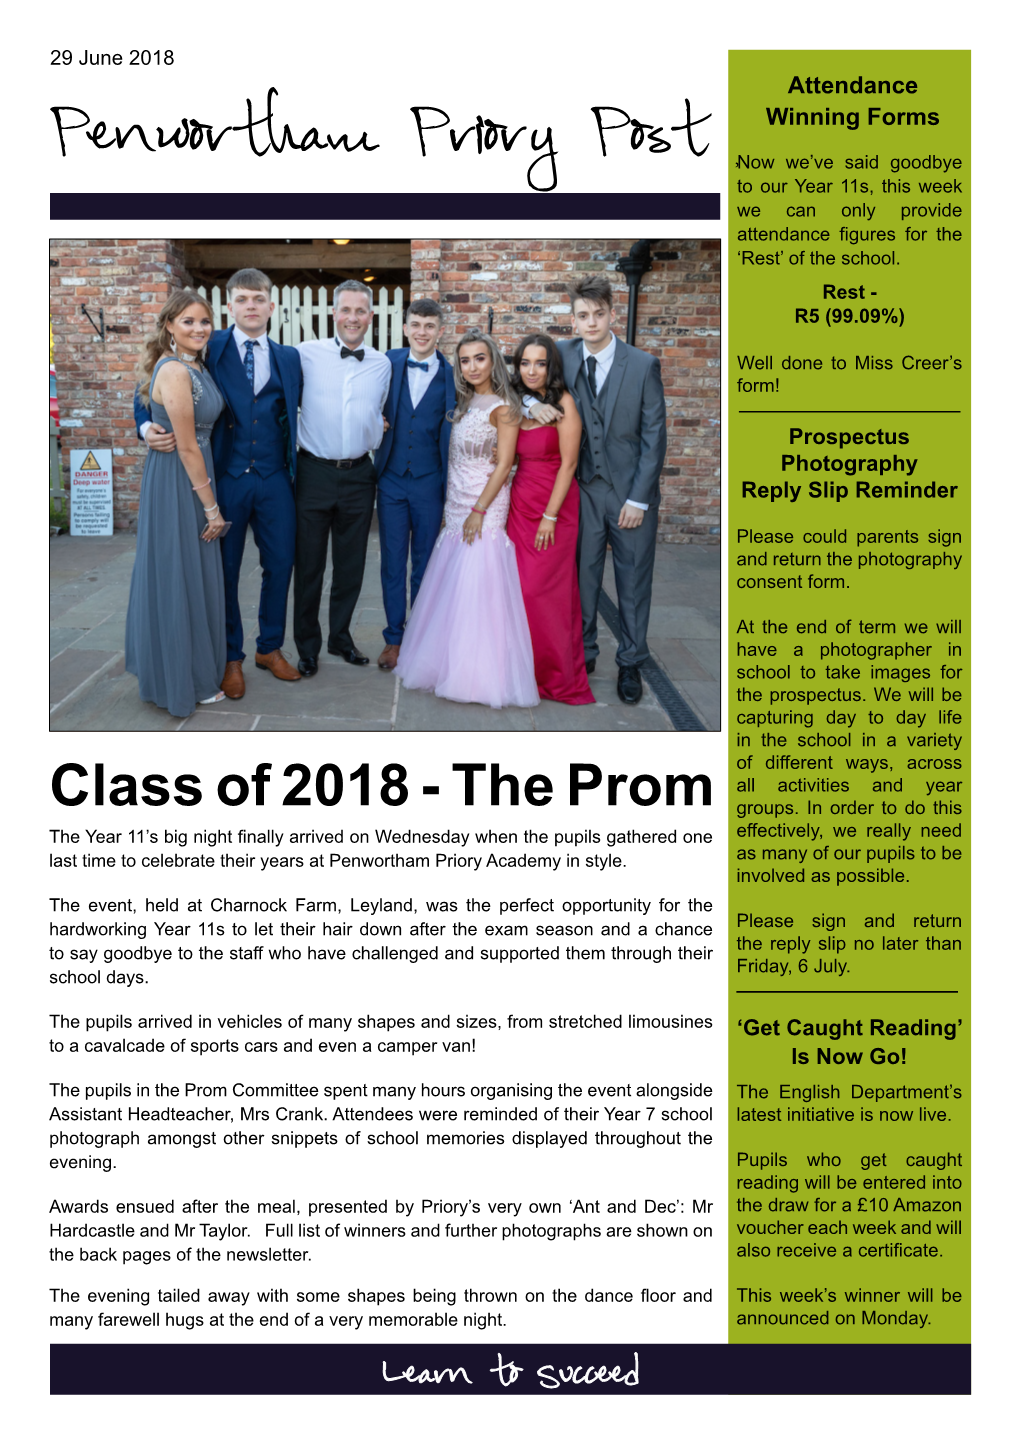 The Prom Groups